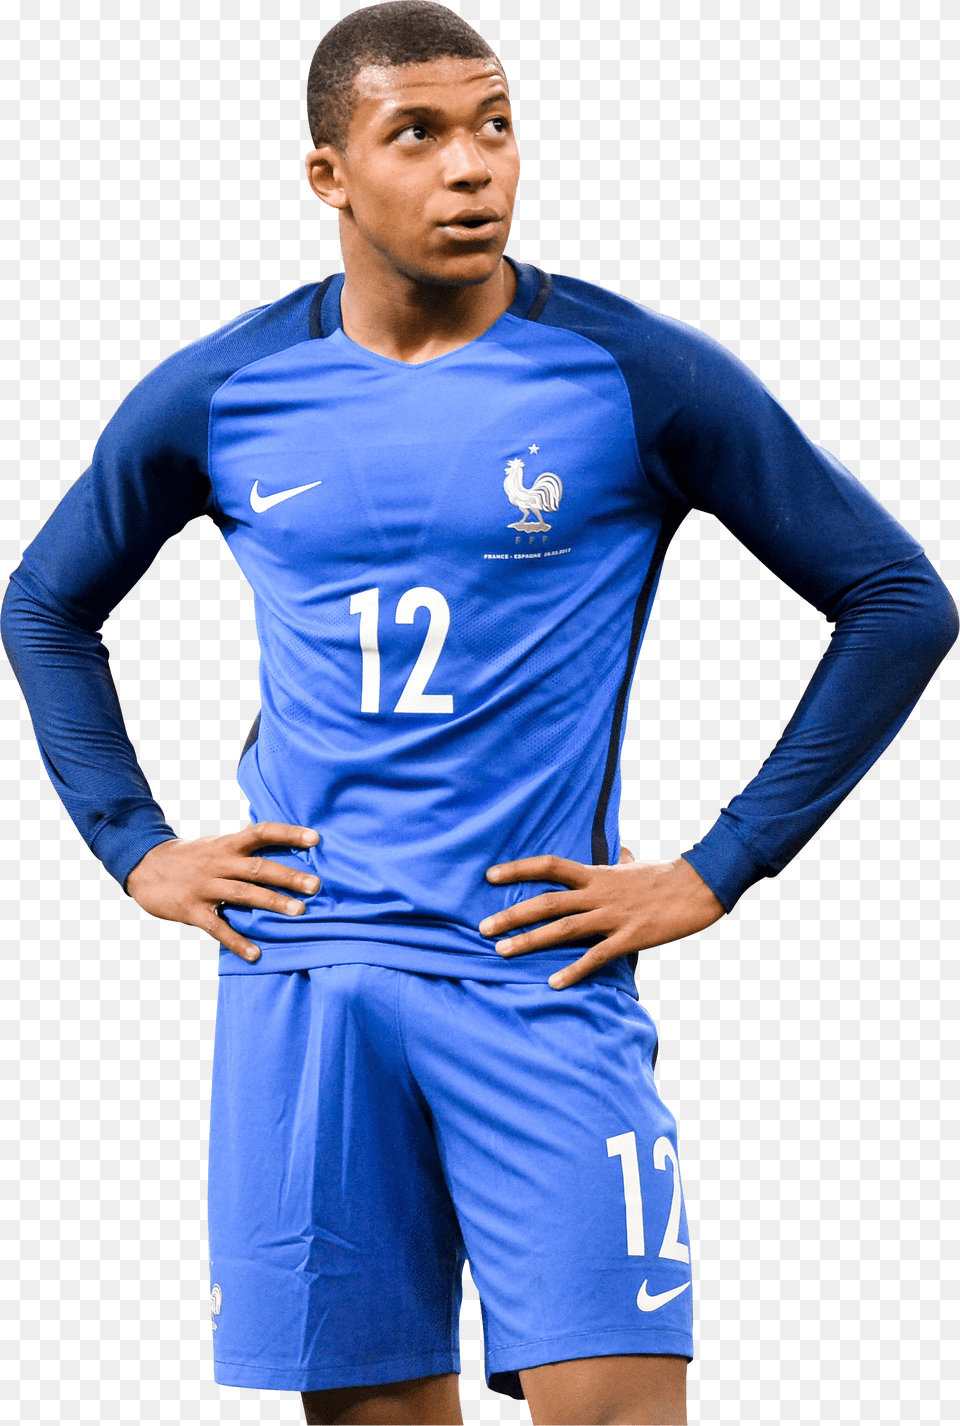 Kylian Mbapp Render Kylian Mbappe France, Shirt, Clothing, Adult, Person Png